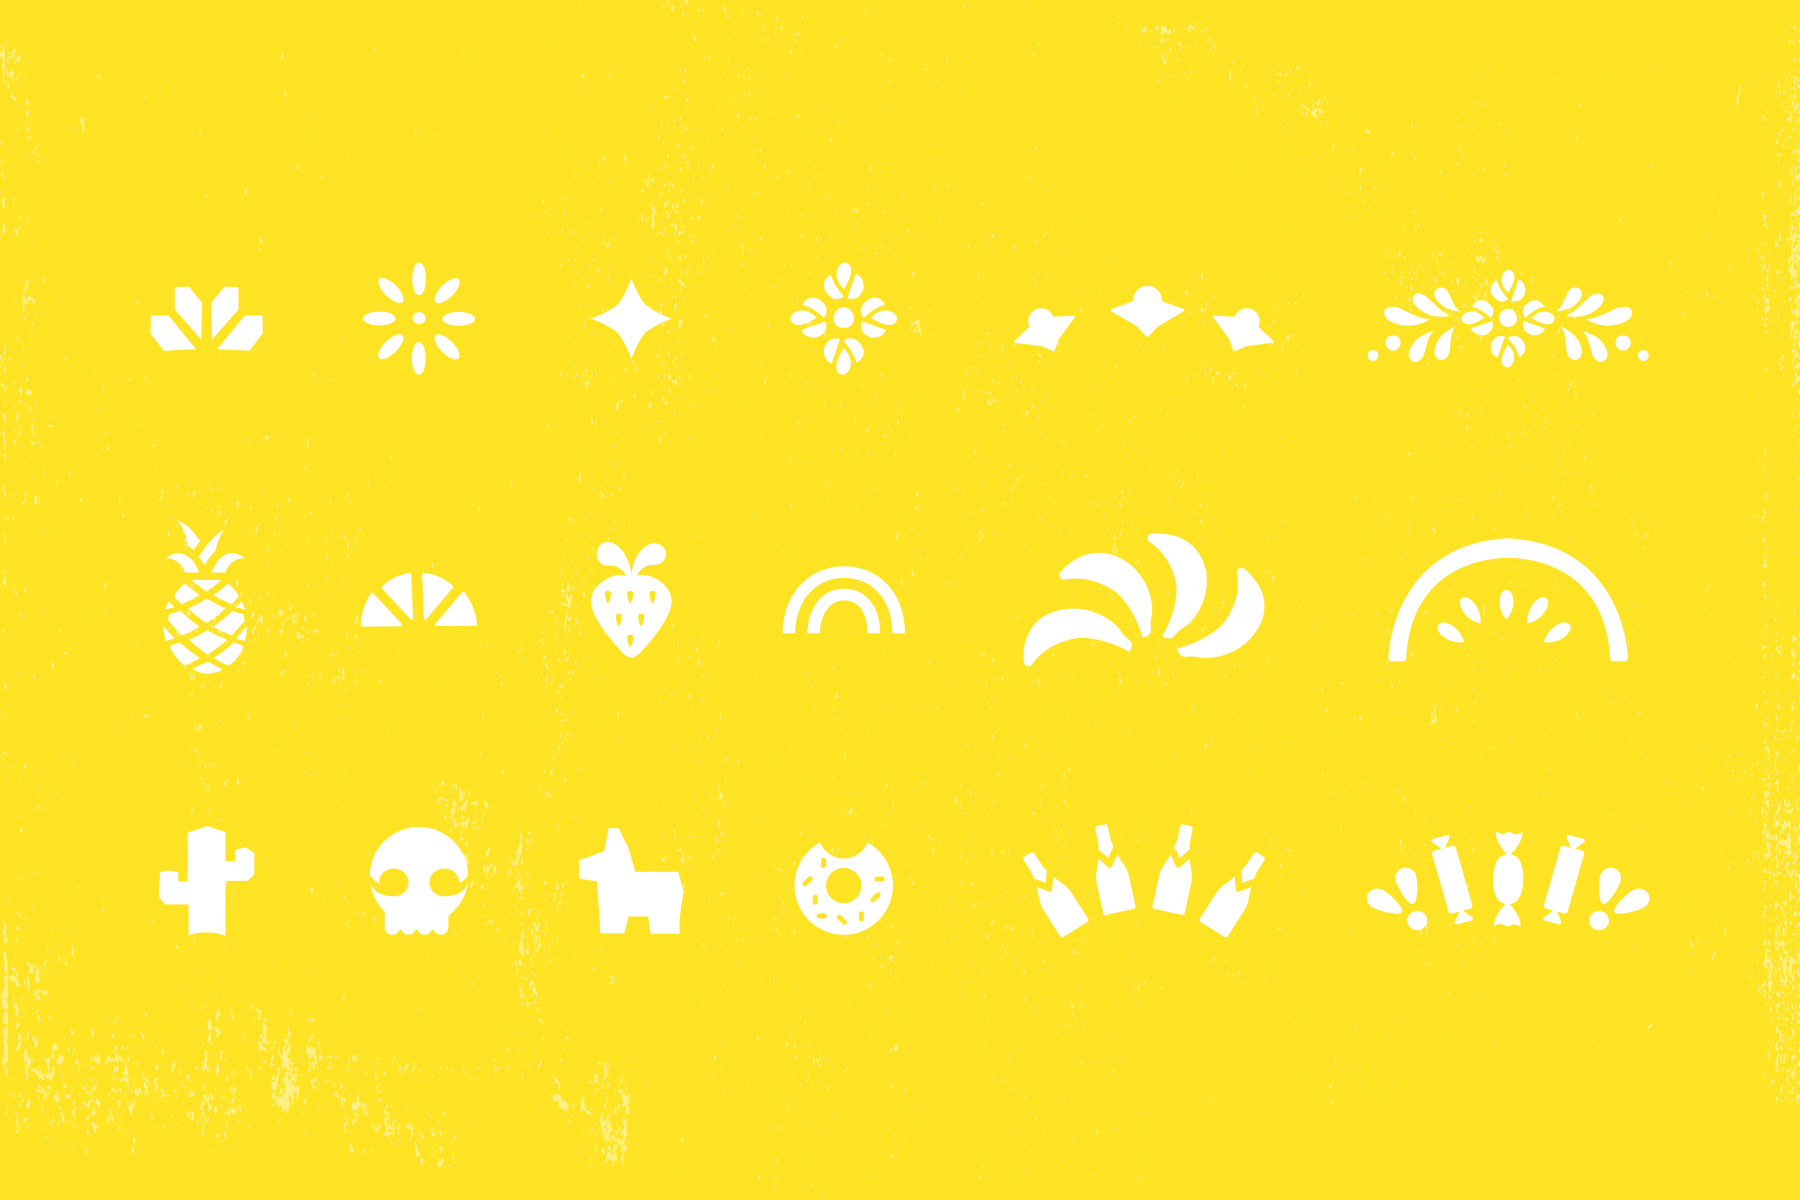 A variety of fiesta icons reminiscent of papel picado